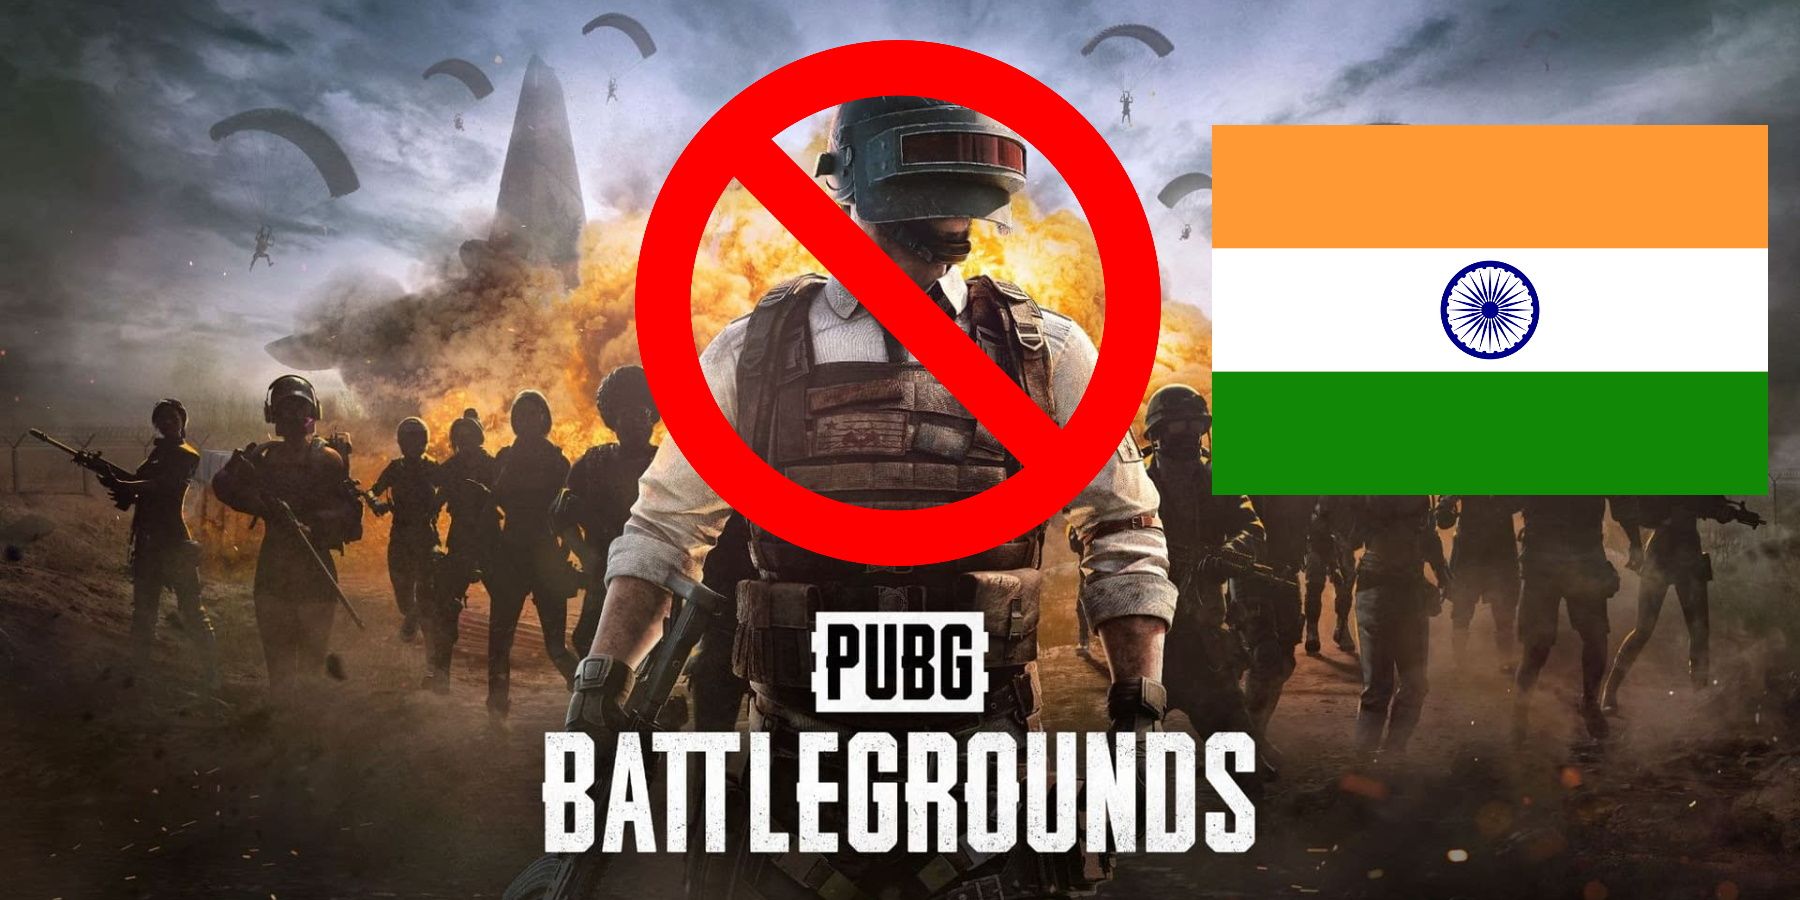 PUBG Has Been Banned in India Again